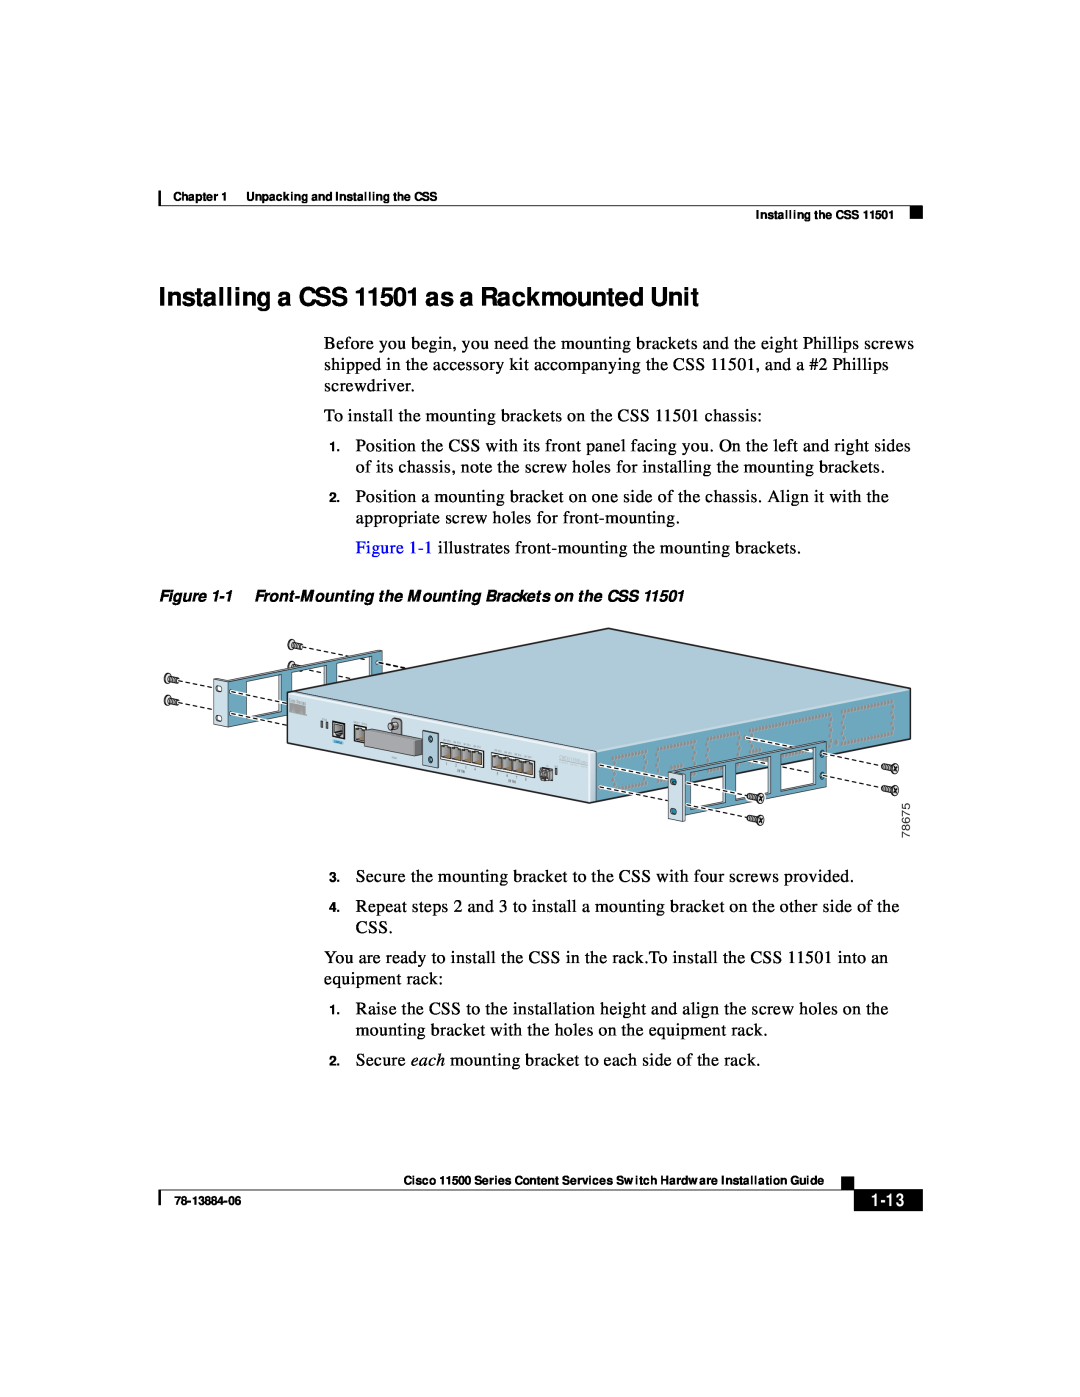 Cisco Systems 11500 Series manual Installing a CSS 11501 as a Rackmounted Unit, 1-13 